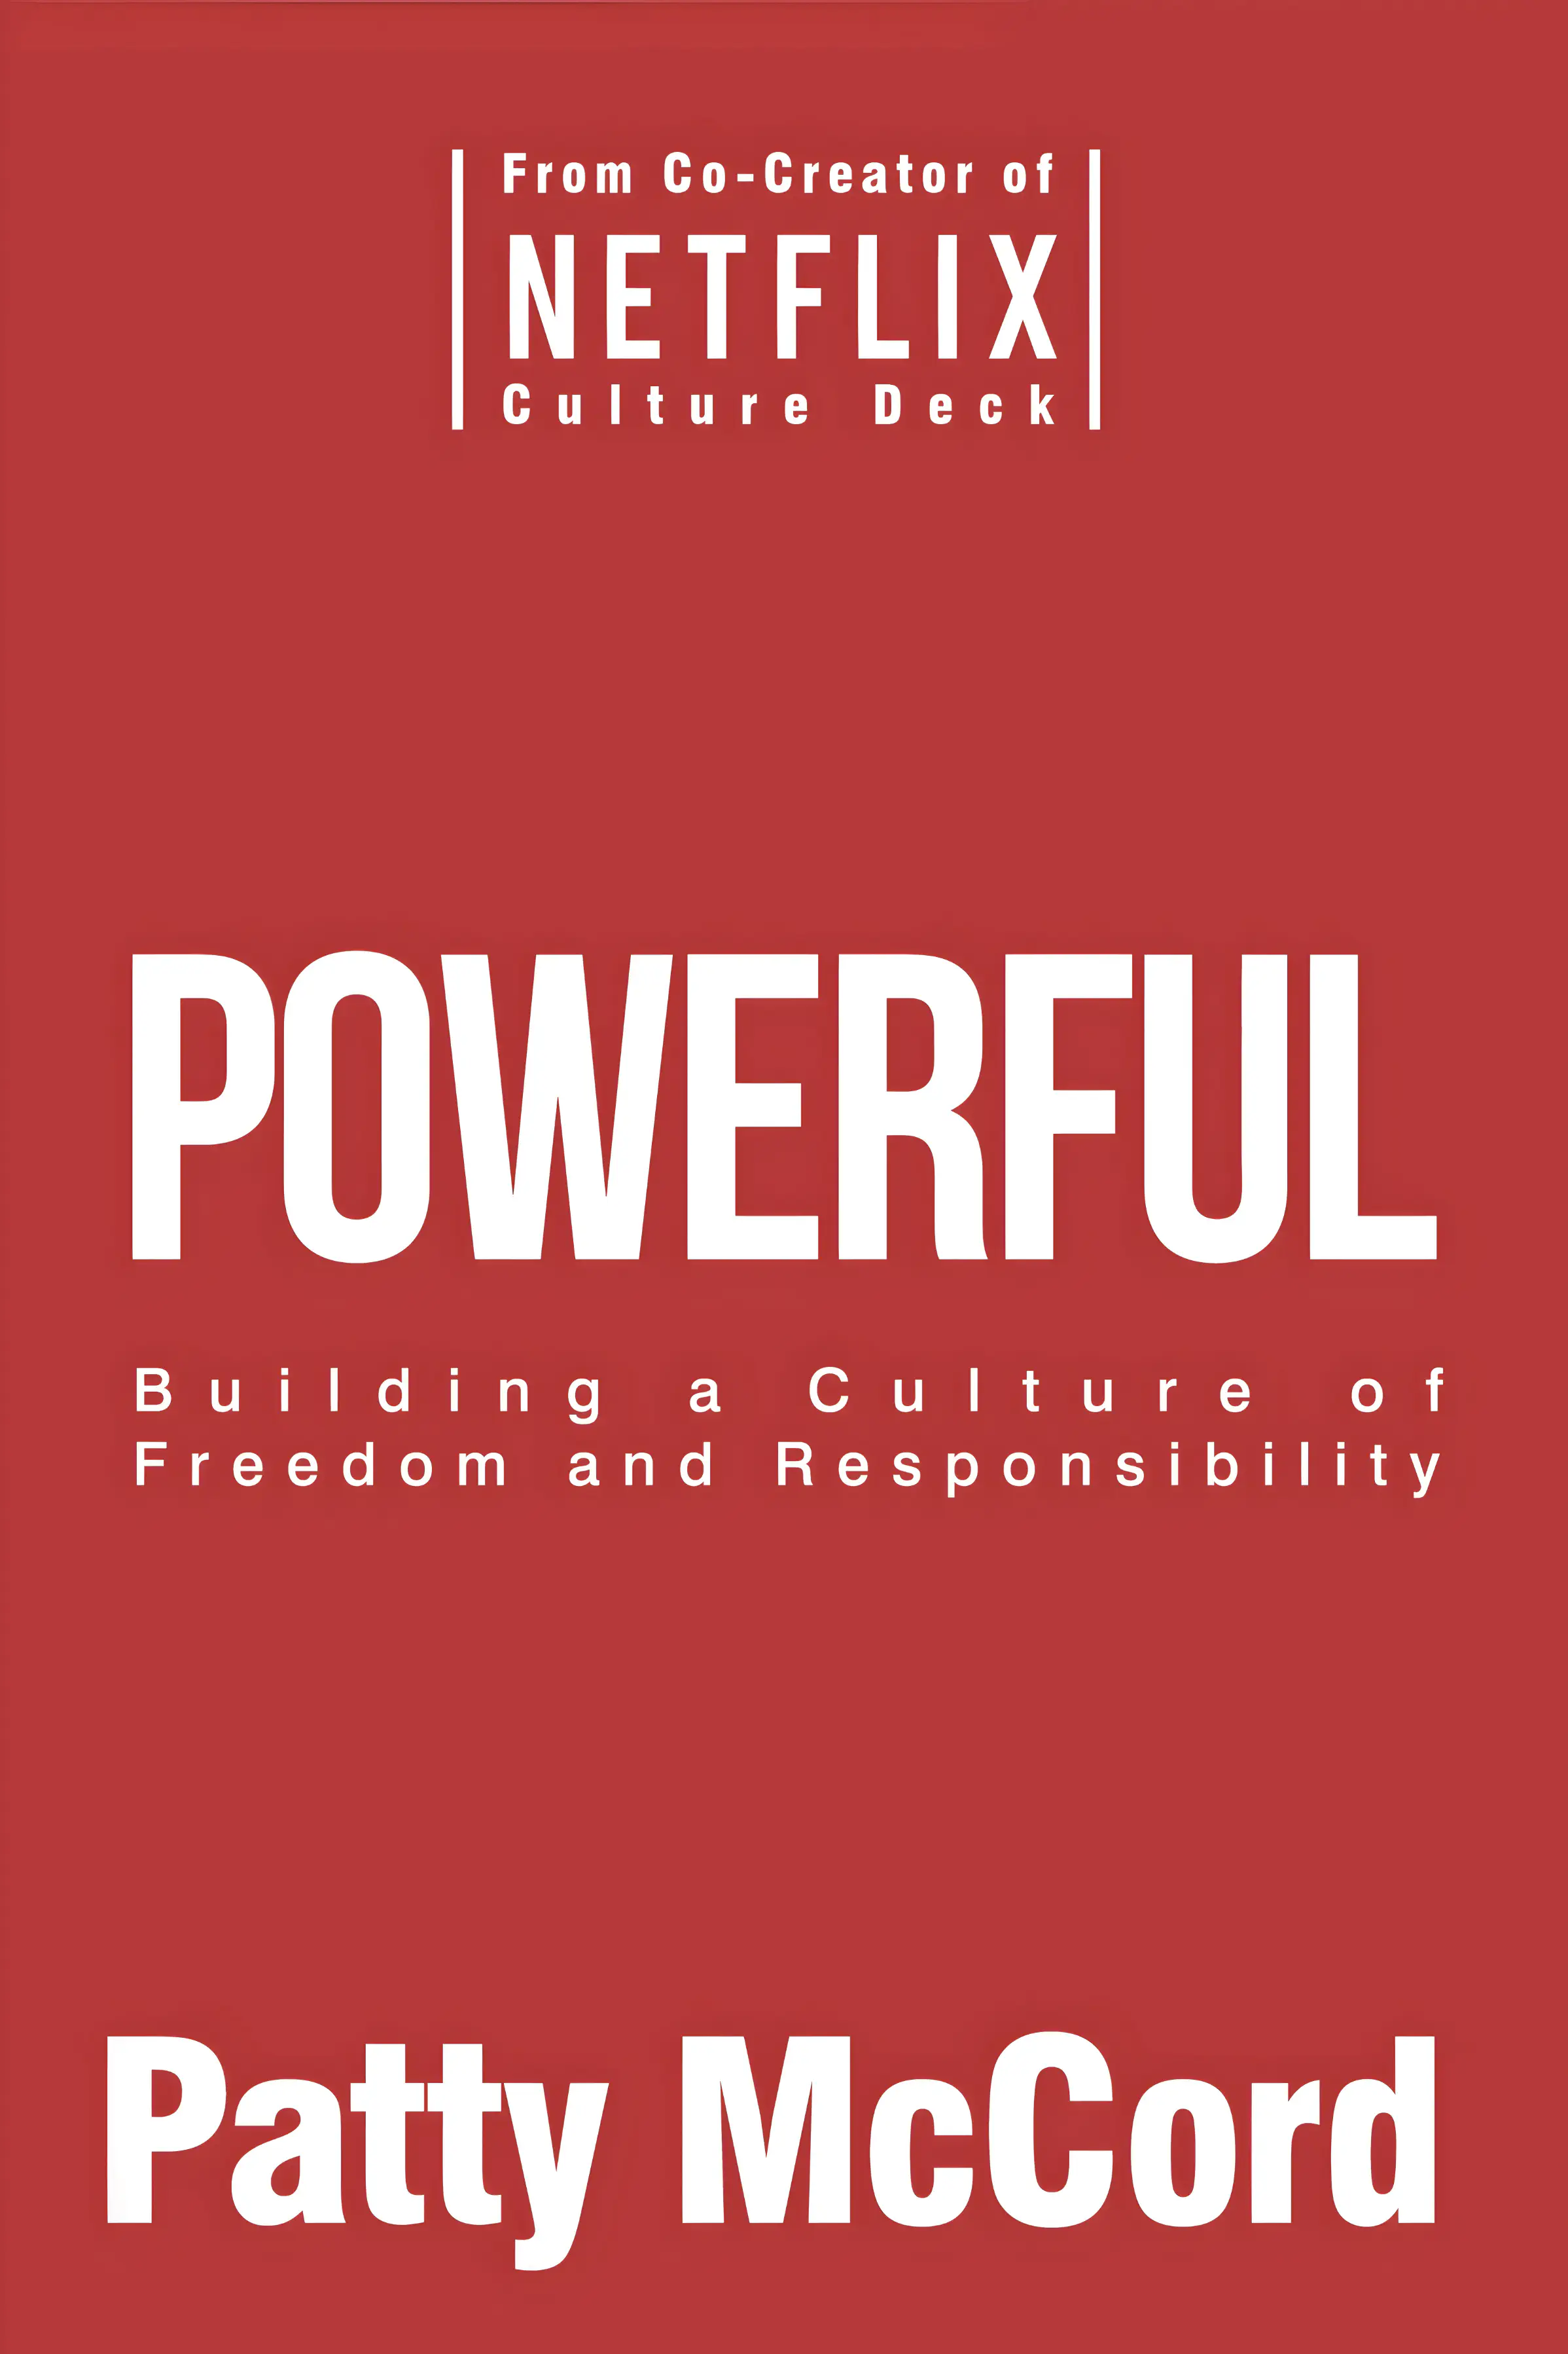 The cover of the book Powerful by Patty McCord